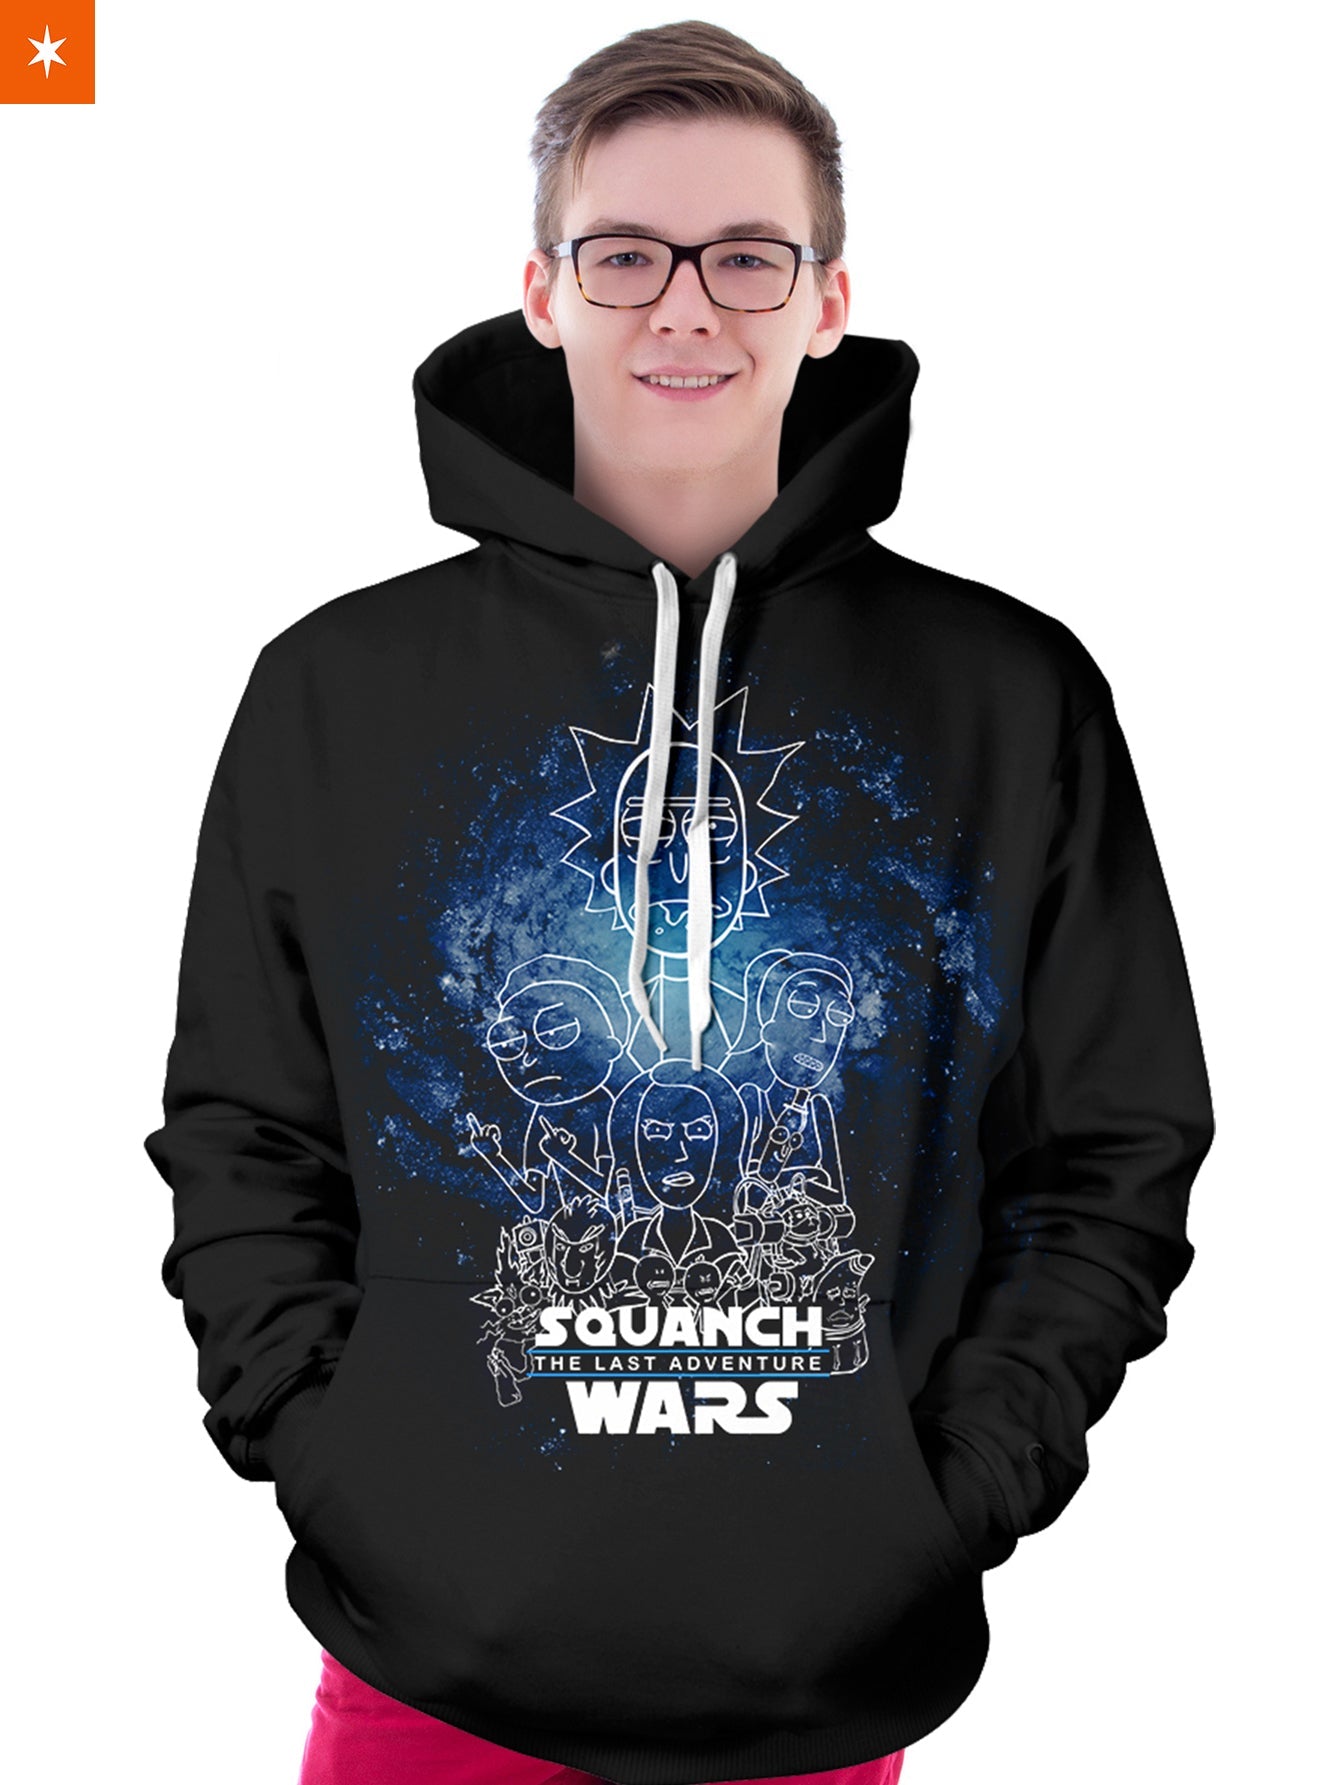 Fandomaniax - Squanch Wars Unisex Pullover Hoodie